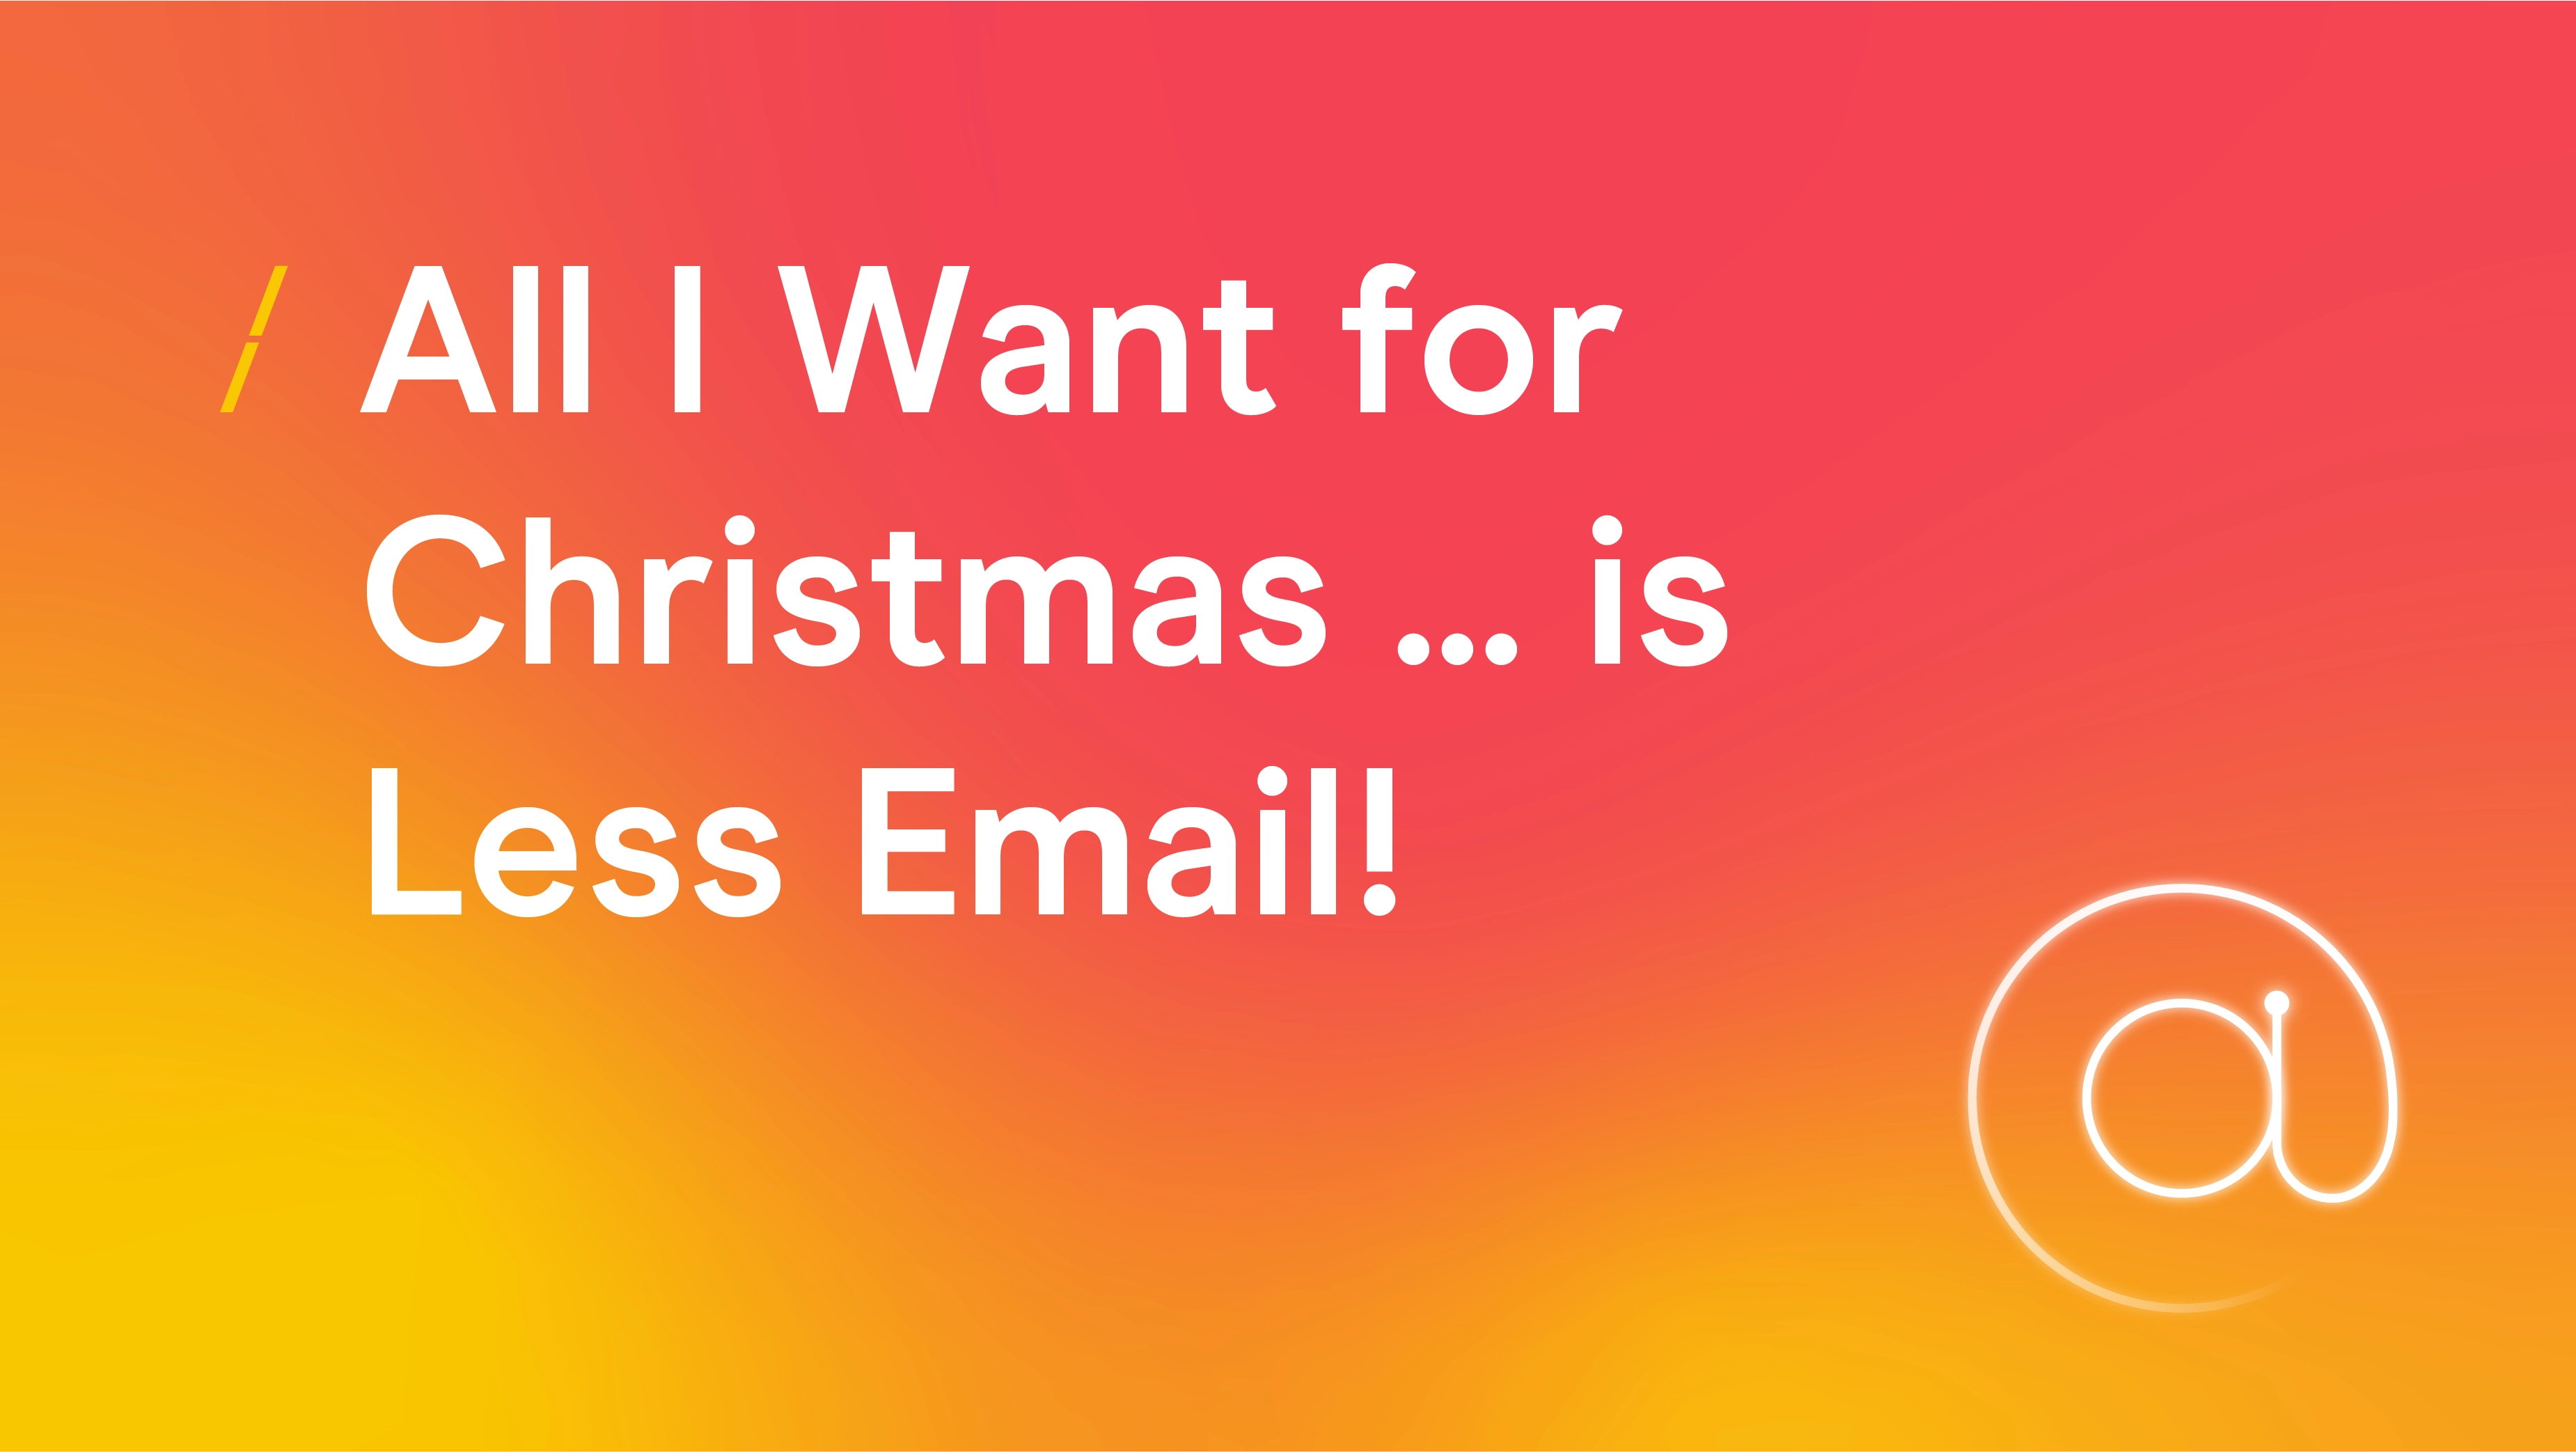 All I Want for Christmas . . . is Less Email!_Research articles copy 2_Research articles copy 2.png